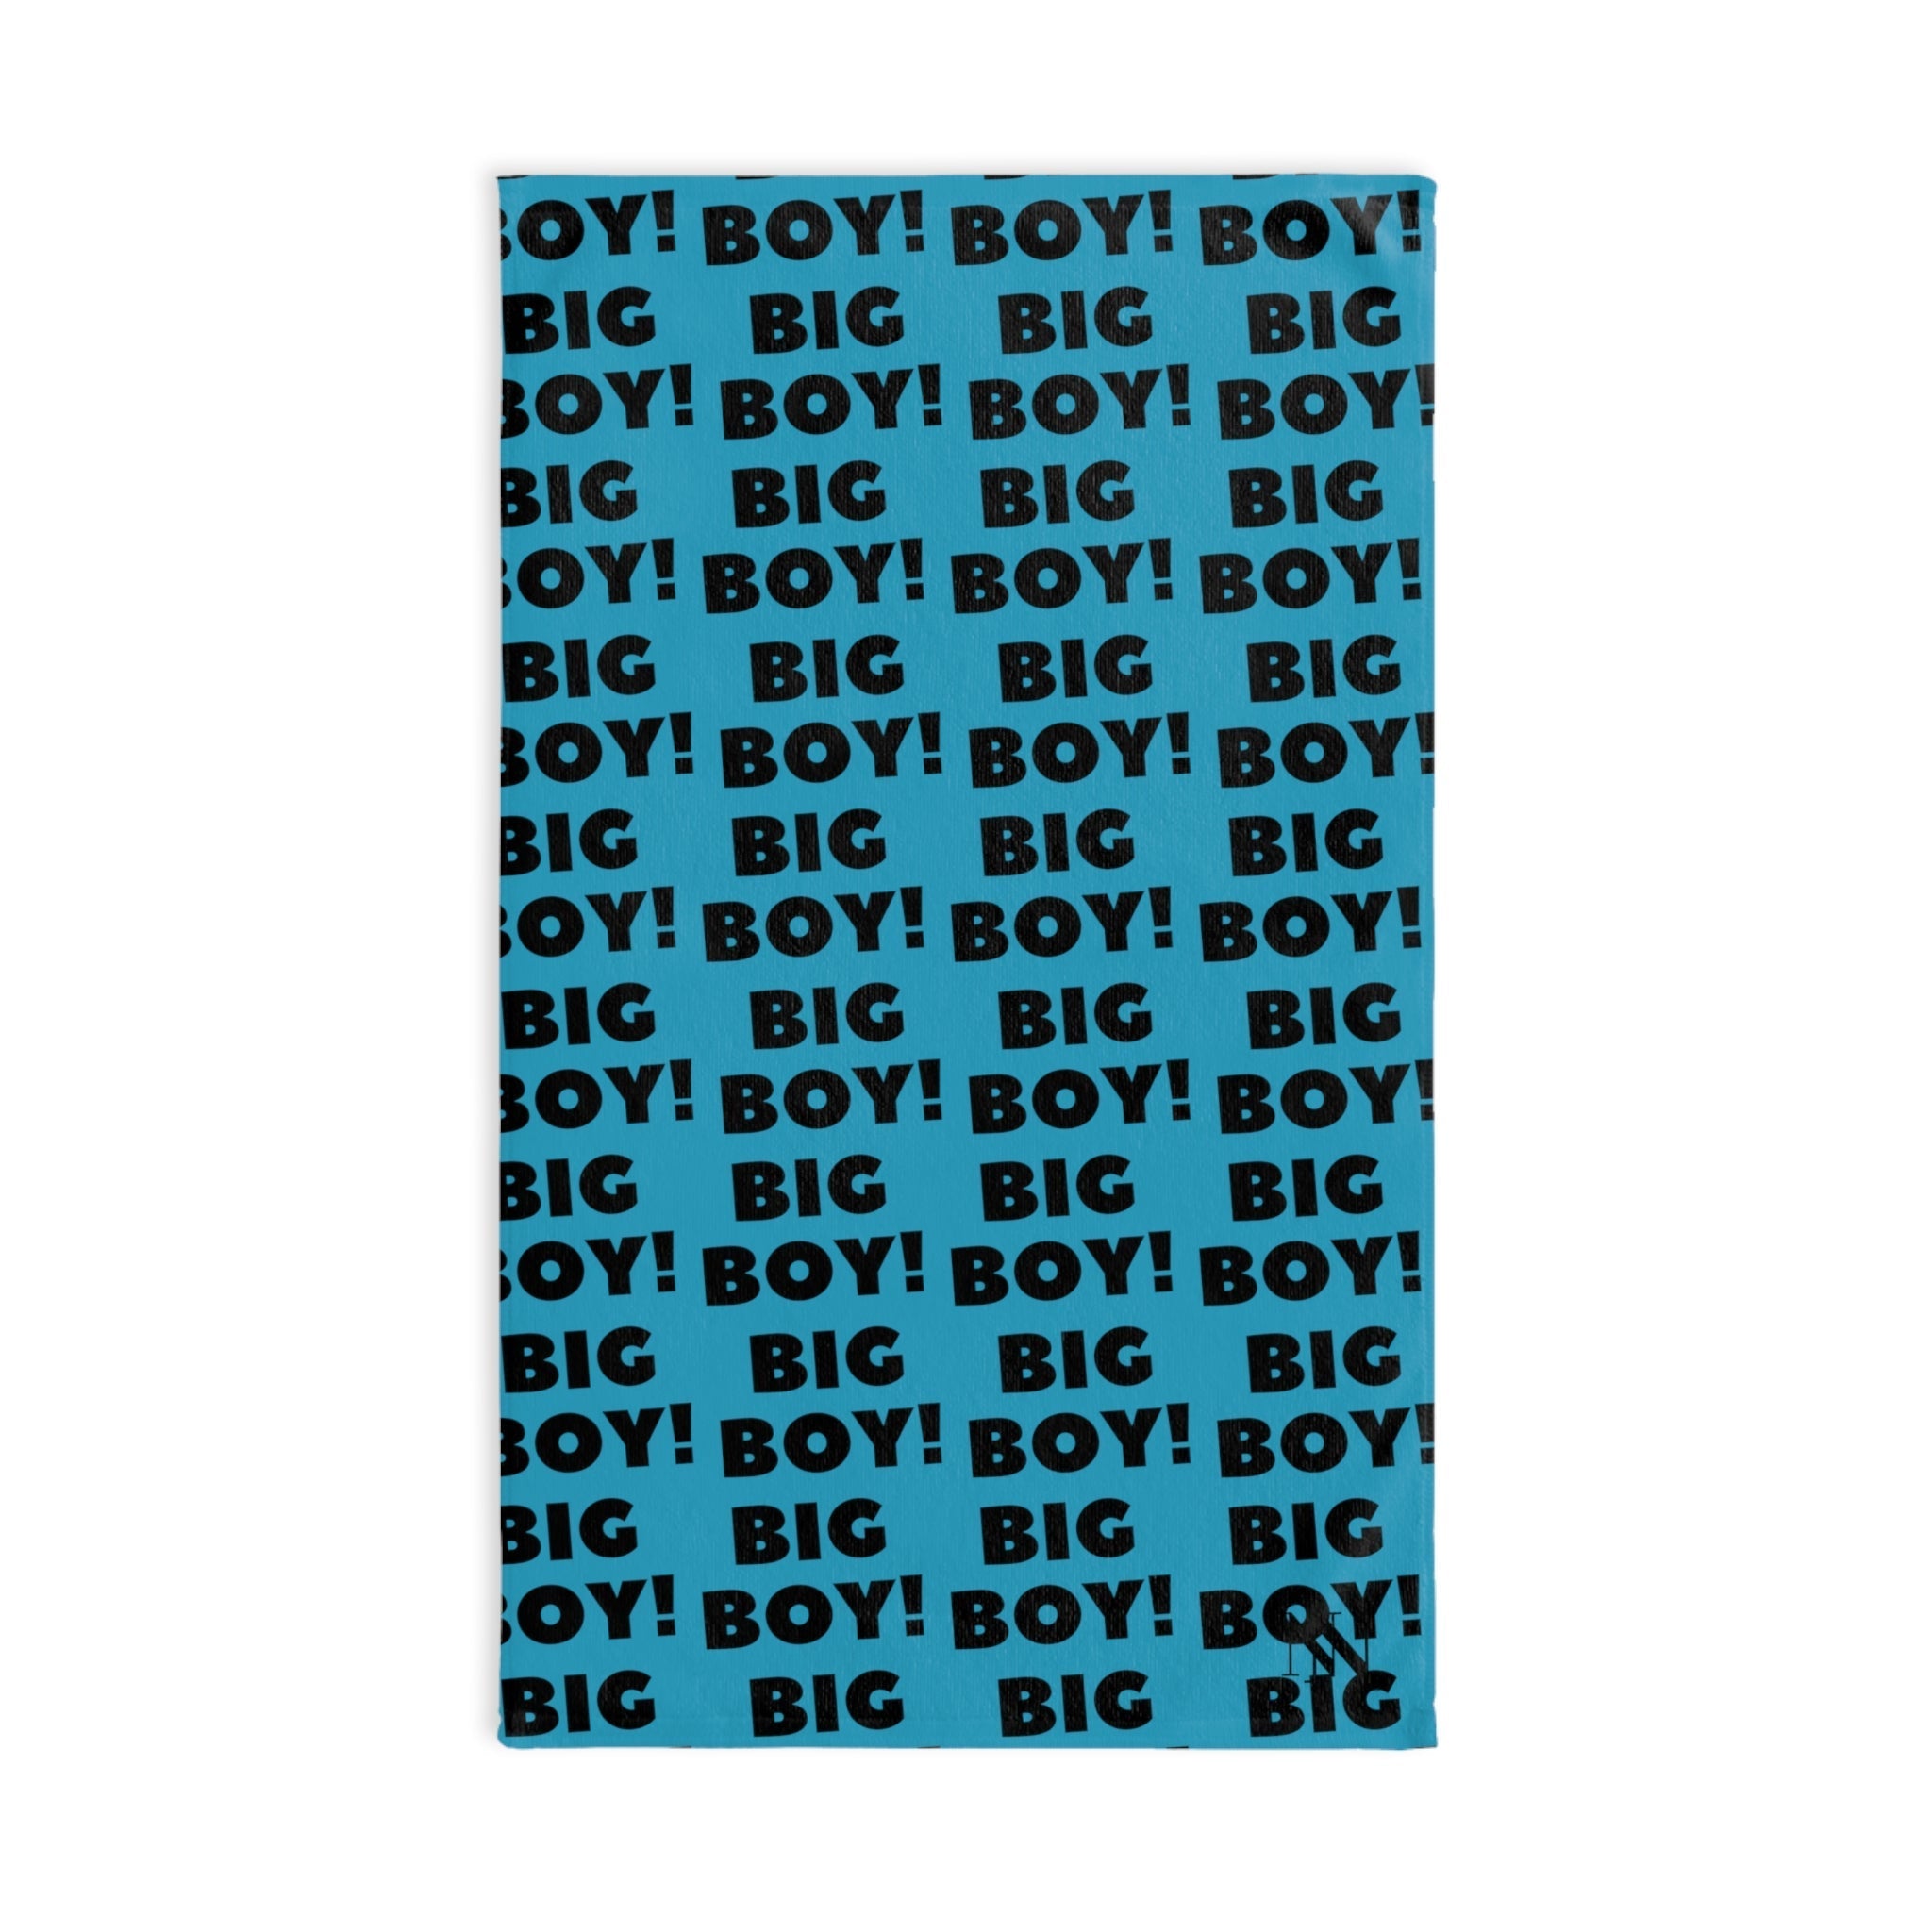 Big Boy Pattern Teal | Novelty Gifts for Boyfriend, Funny Towel Romantic Gift for Wedding Couple Fiance First Year Anniversary Valentines, Party Gag Gifts, Joke Humor Cloth for Husband Men BF NECTAR NAPKINS